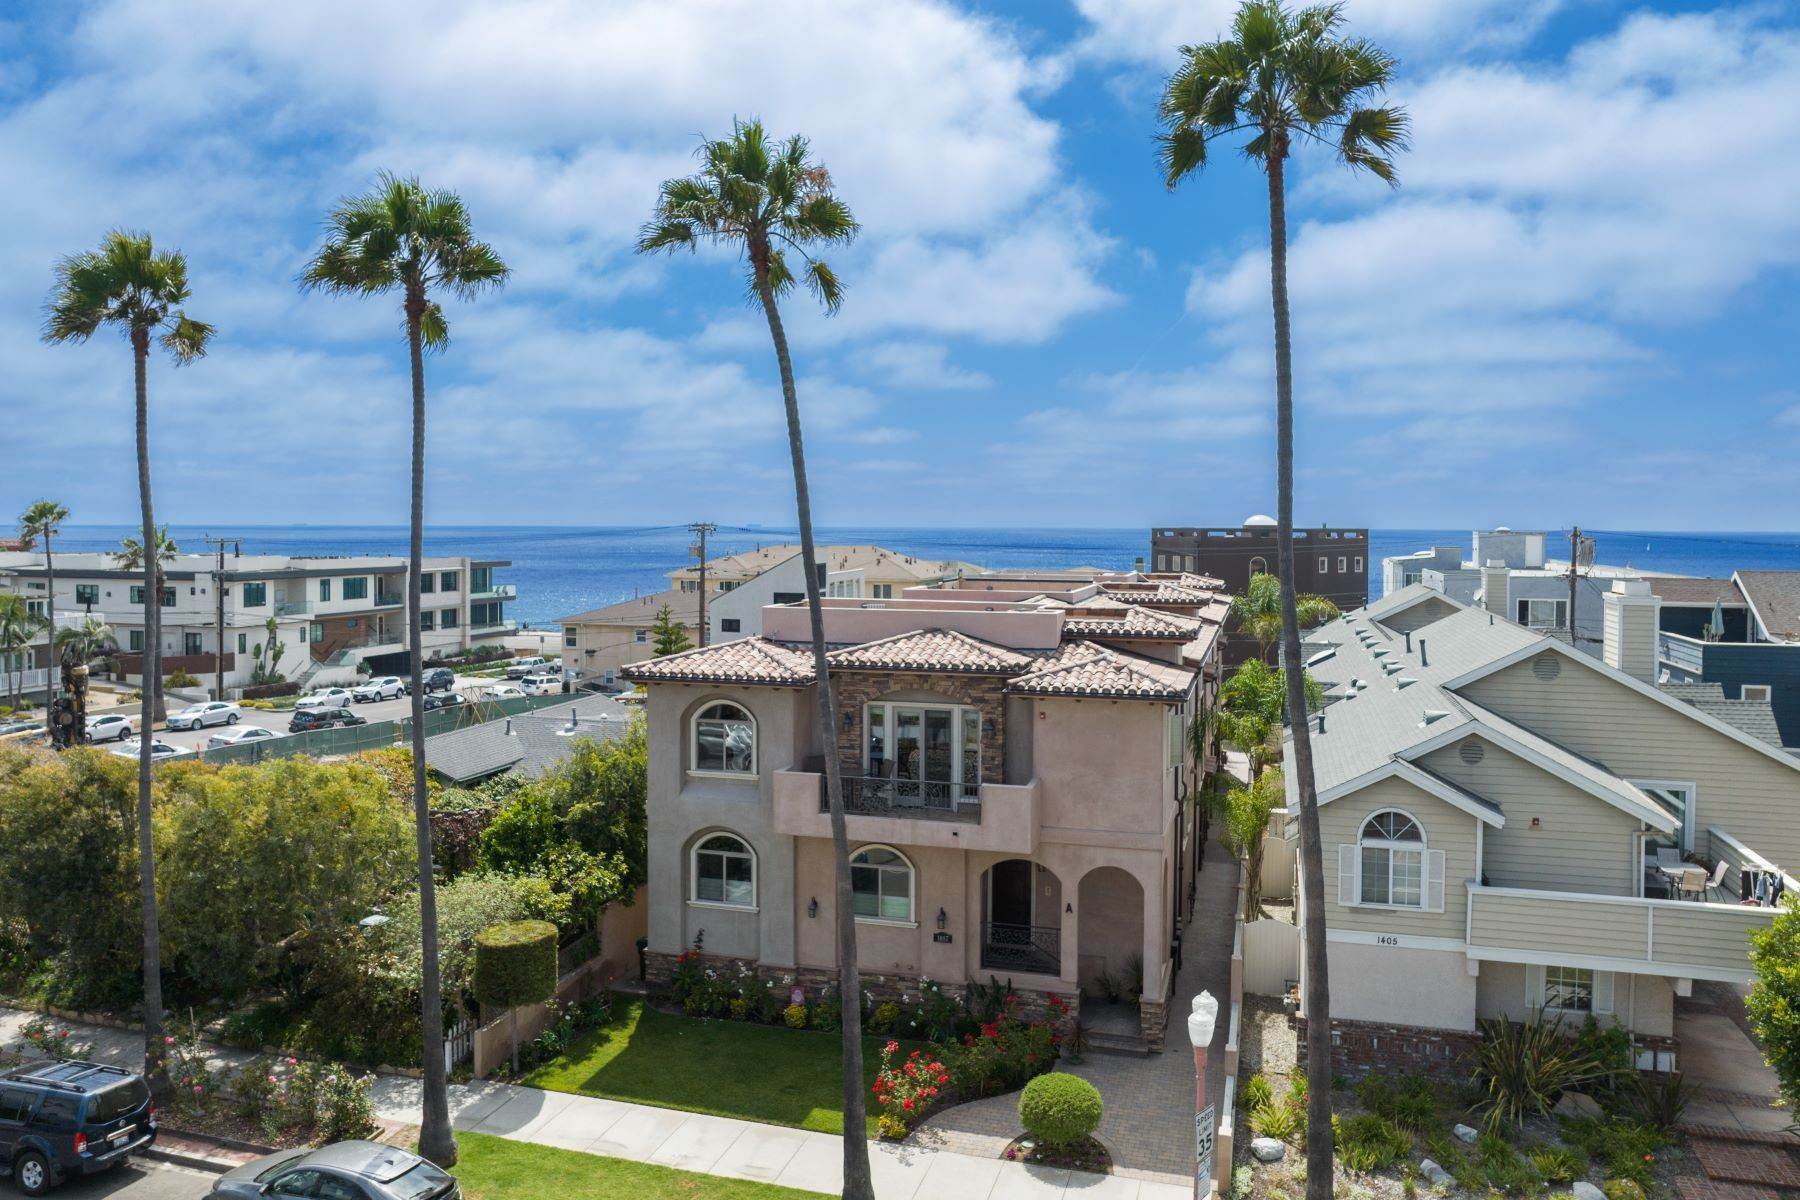 Townhouse for Sale at 1407 South Catalina Avenue Unit A, Redondo Beach, CA 90277 1407 South Catalina Avenue Unit A Redondo Beach, California 90277 United States